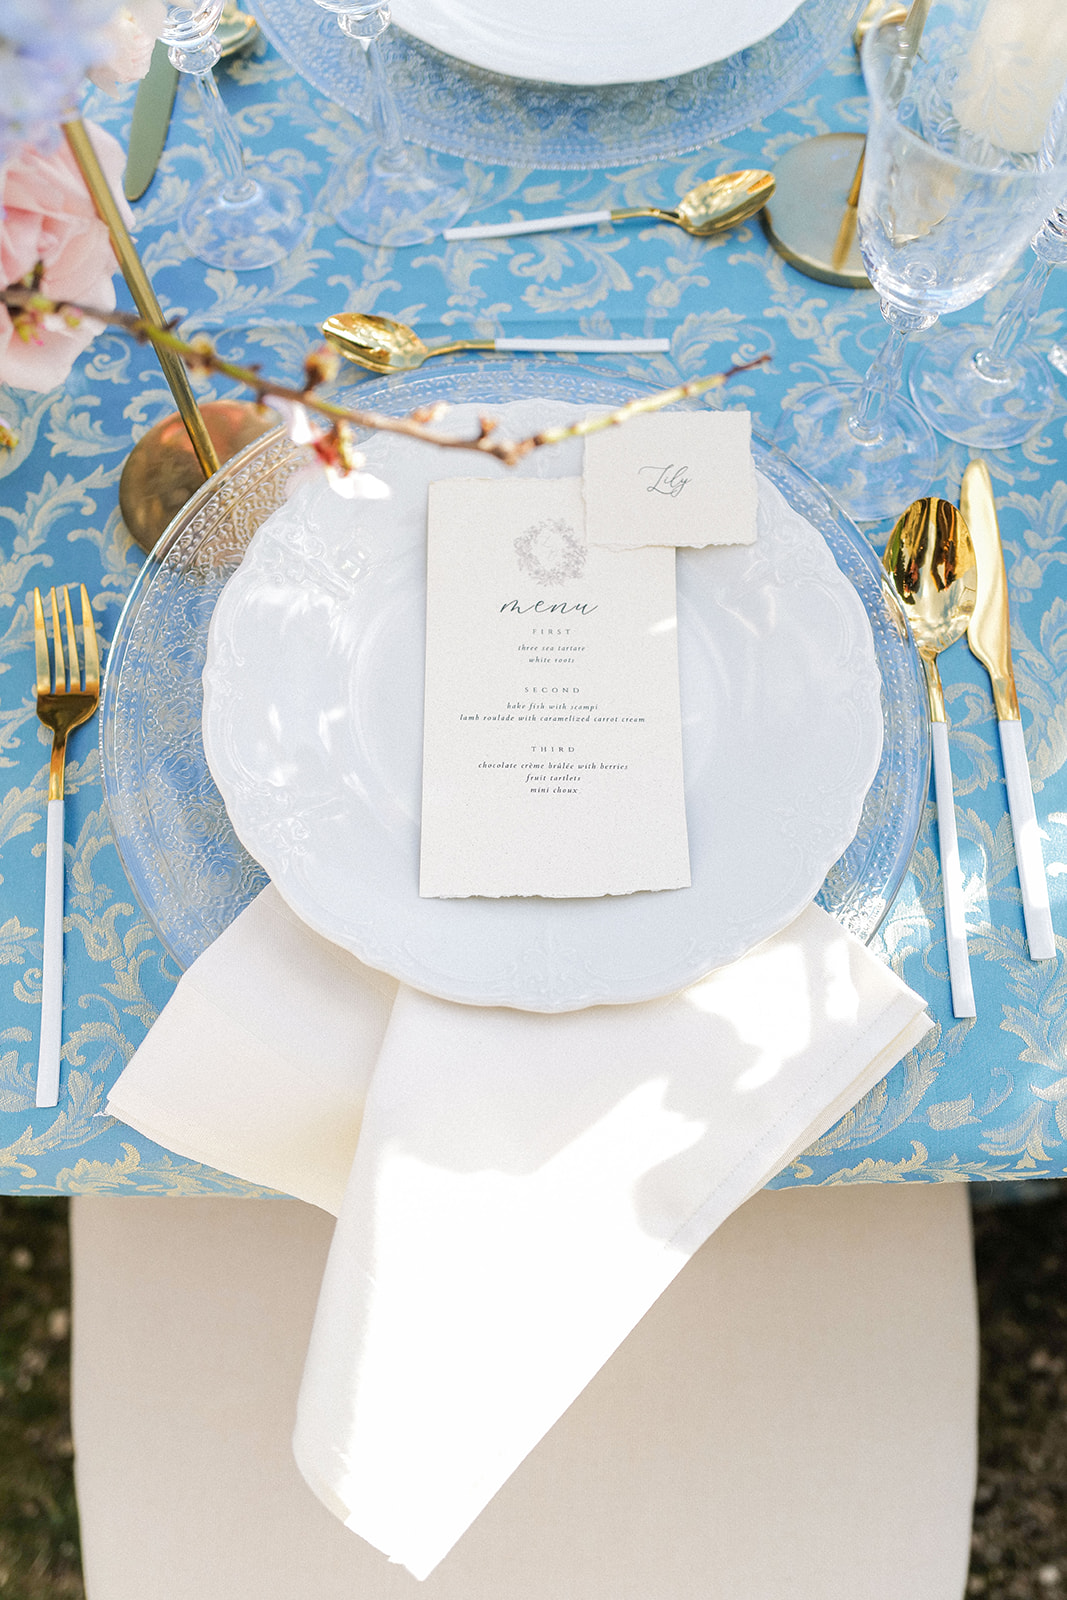 elegant table setting with gold flatware